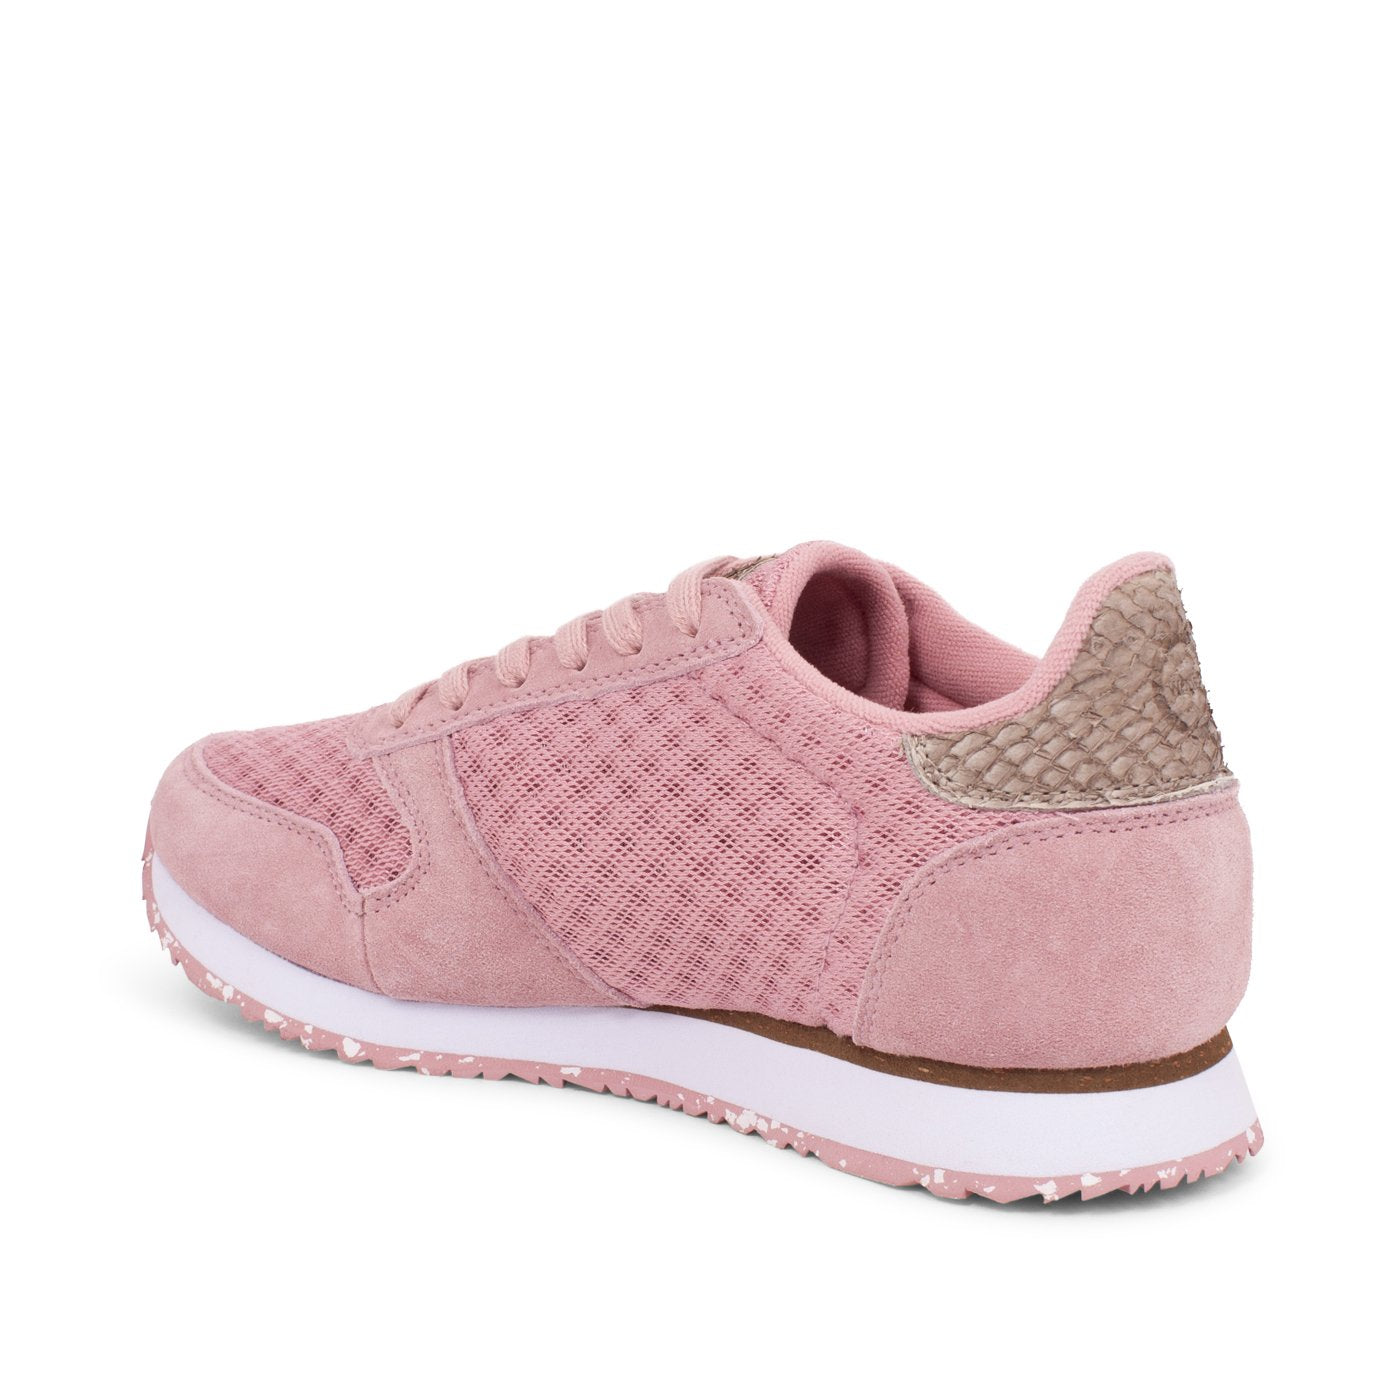 WODEN YDUN SUEDE MESH II - SOFT PINK - Collective Shoes 